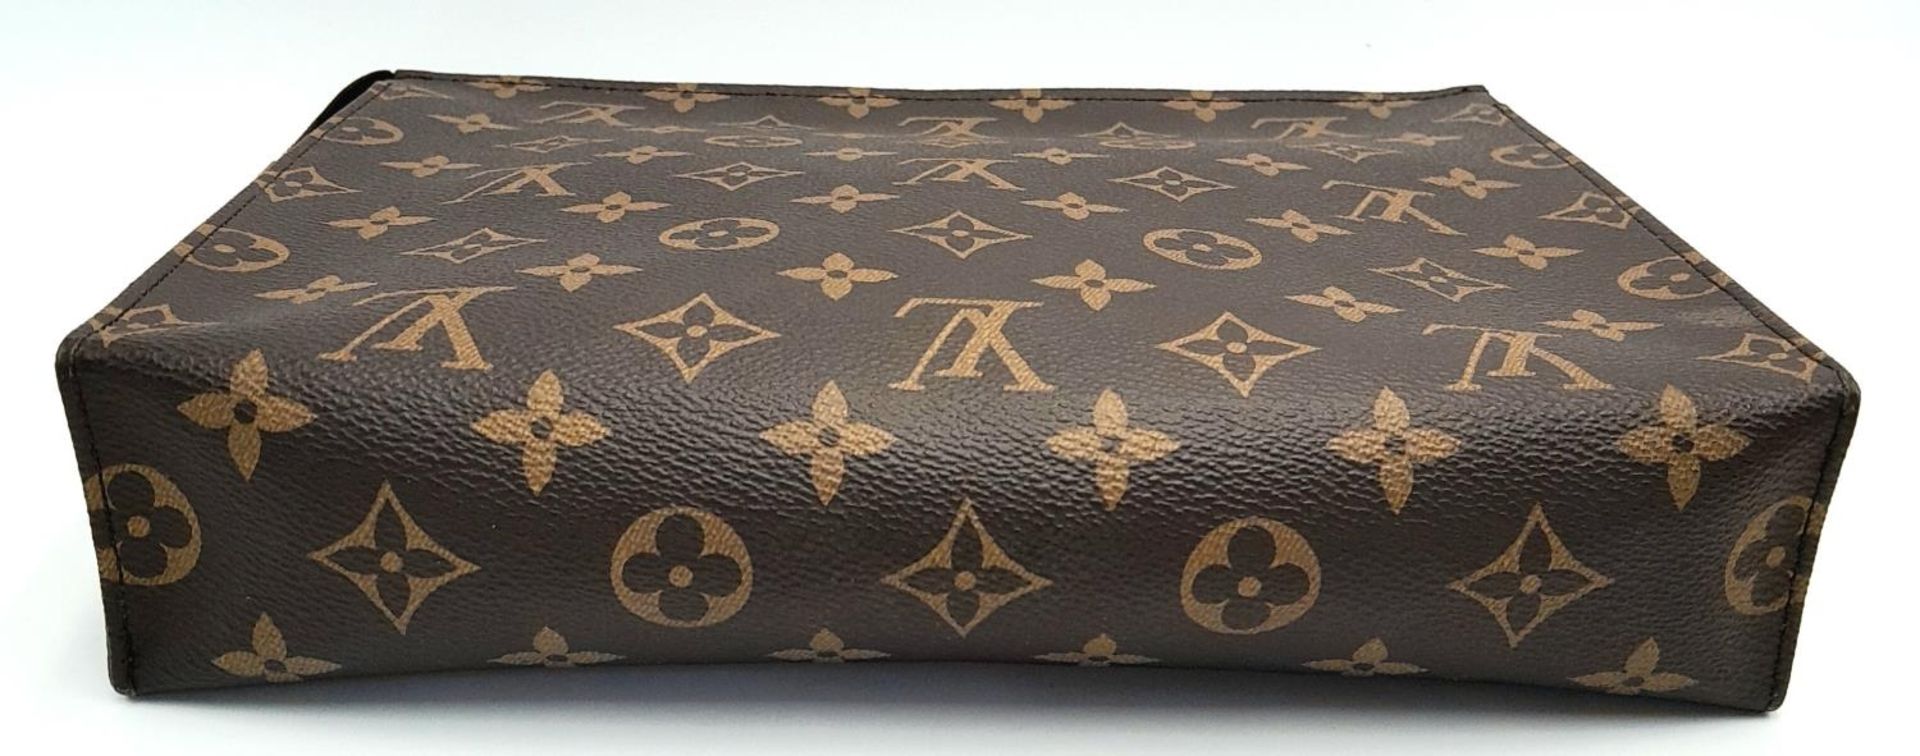 A Louis Vuitton Toiletries Pouch. Monogramed canvas exterior with gold-toned hardware and zipped top - Image 5 of 9